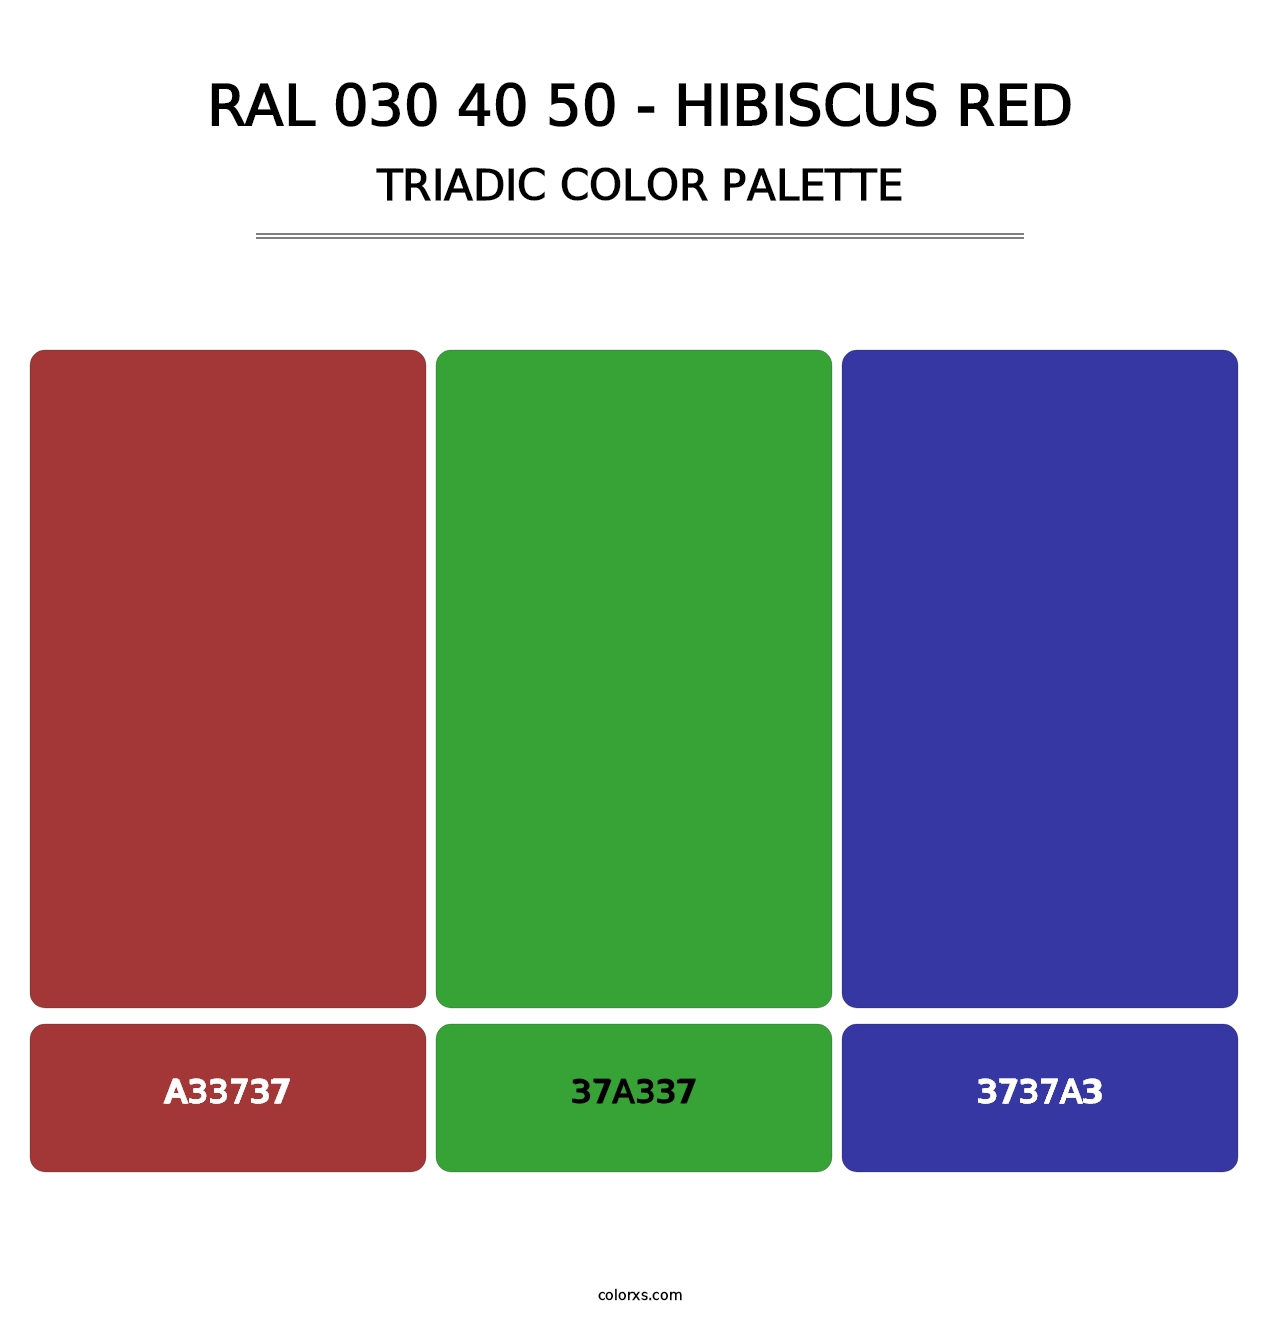 RAL 030 40 50 - Hibiscus Red - Triadic Color Palette